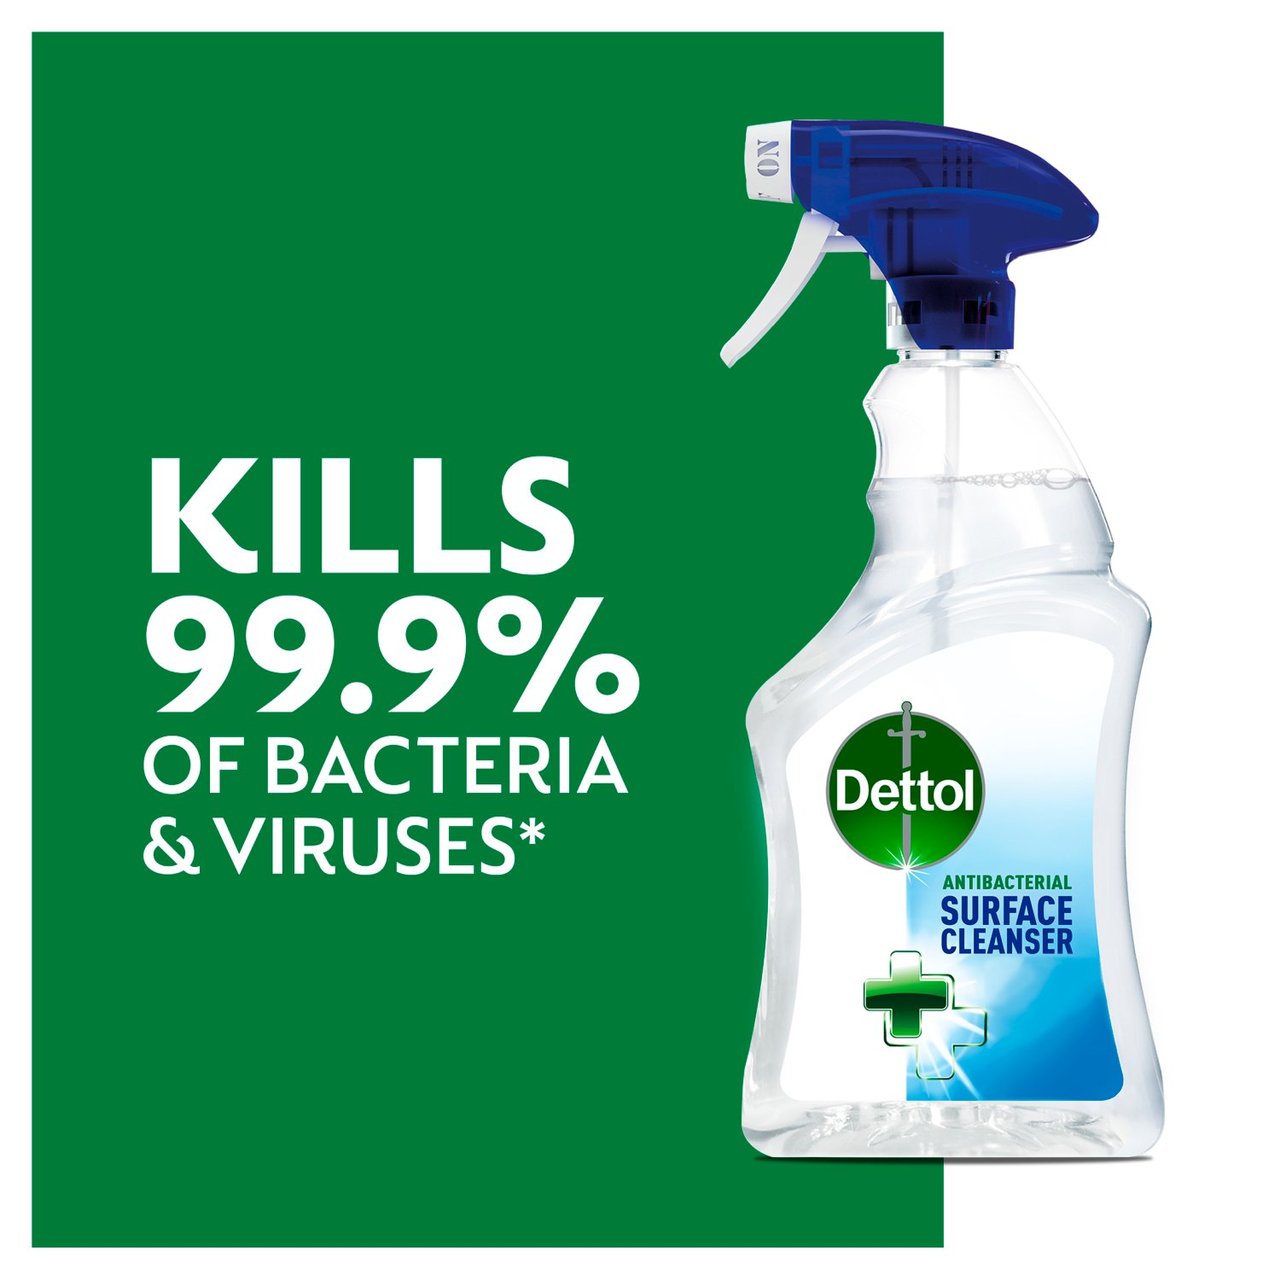 Dettol Antibacterial Disinfectant Surface Cleaning Spray